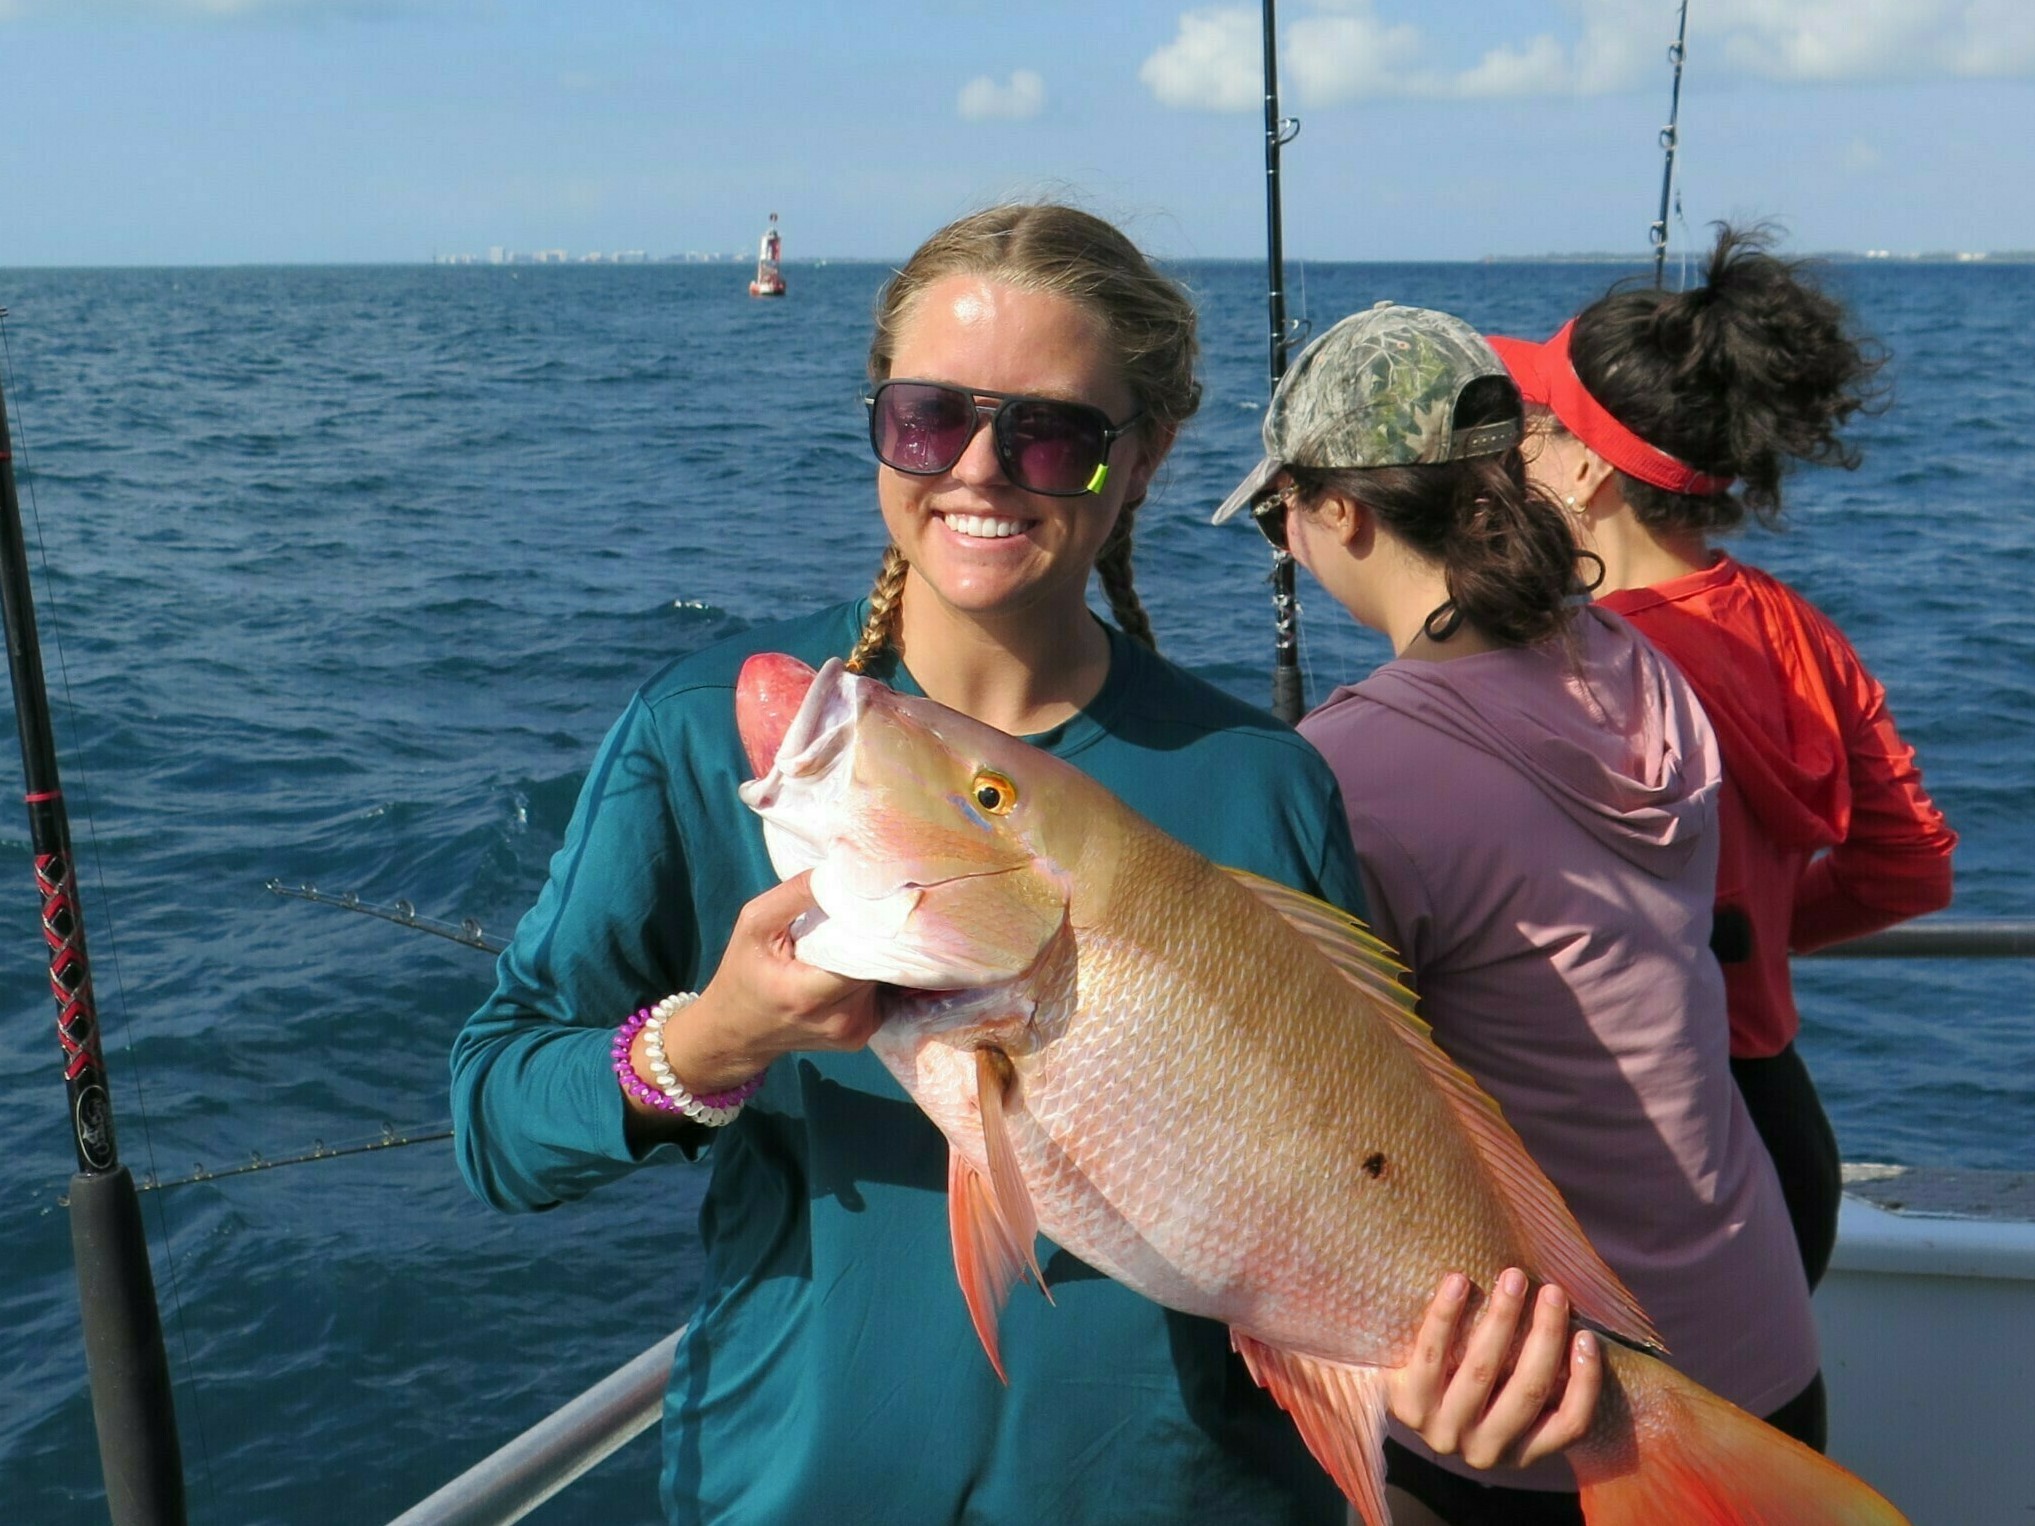 After catch and release, here's how to make sure reef fish survive - WPR